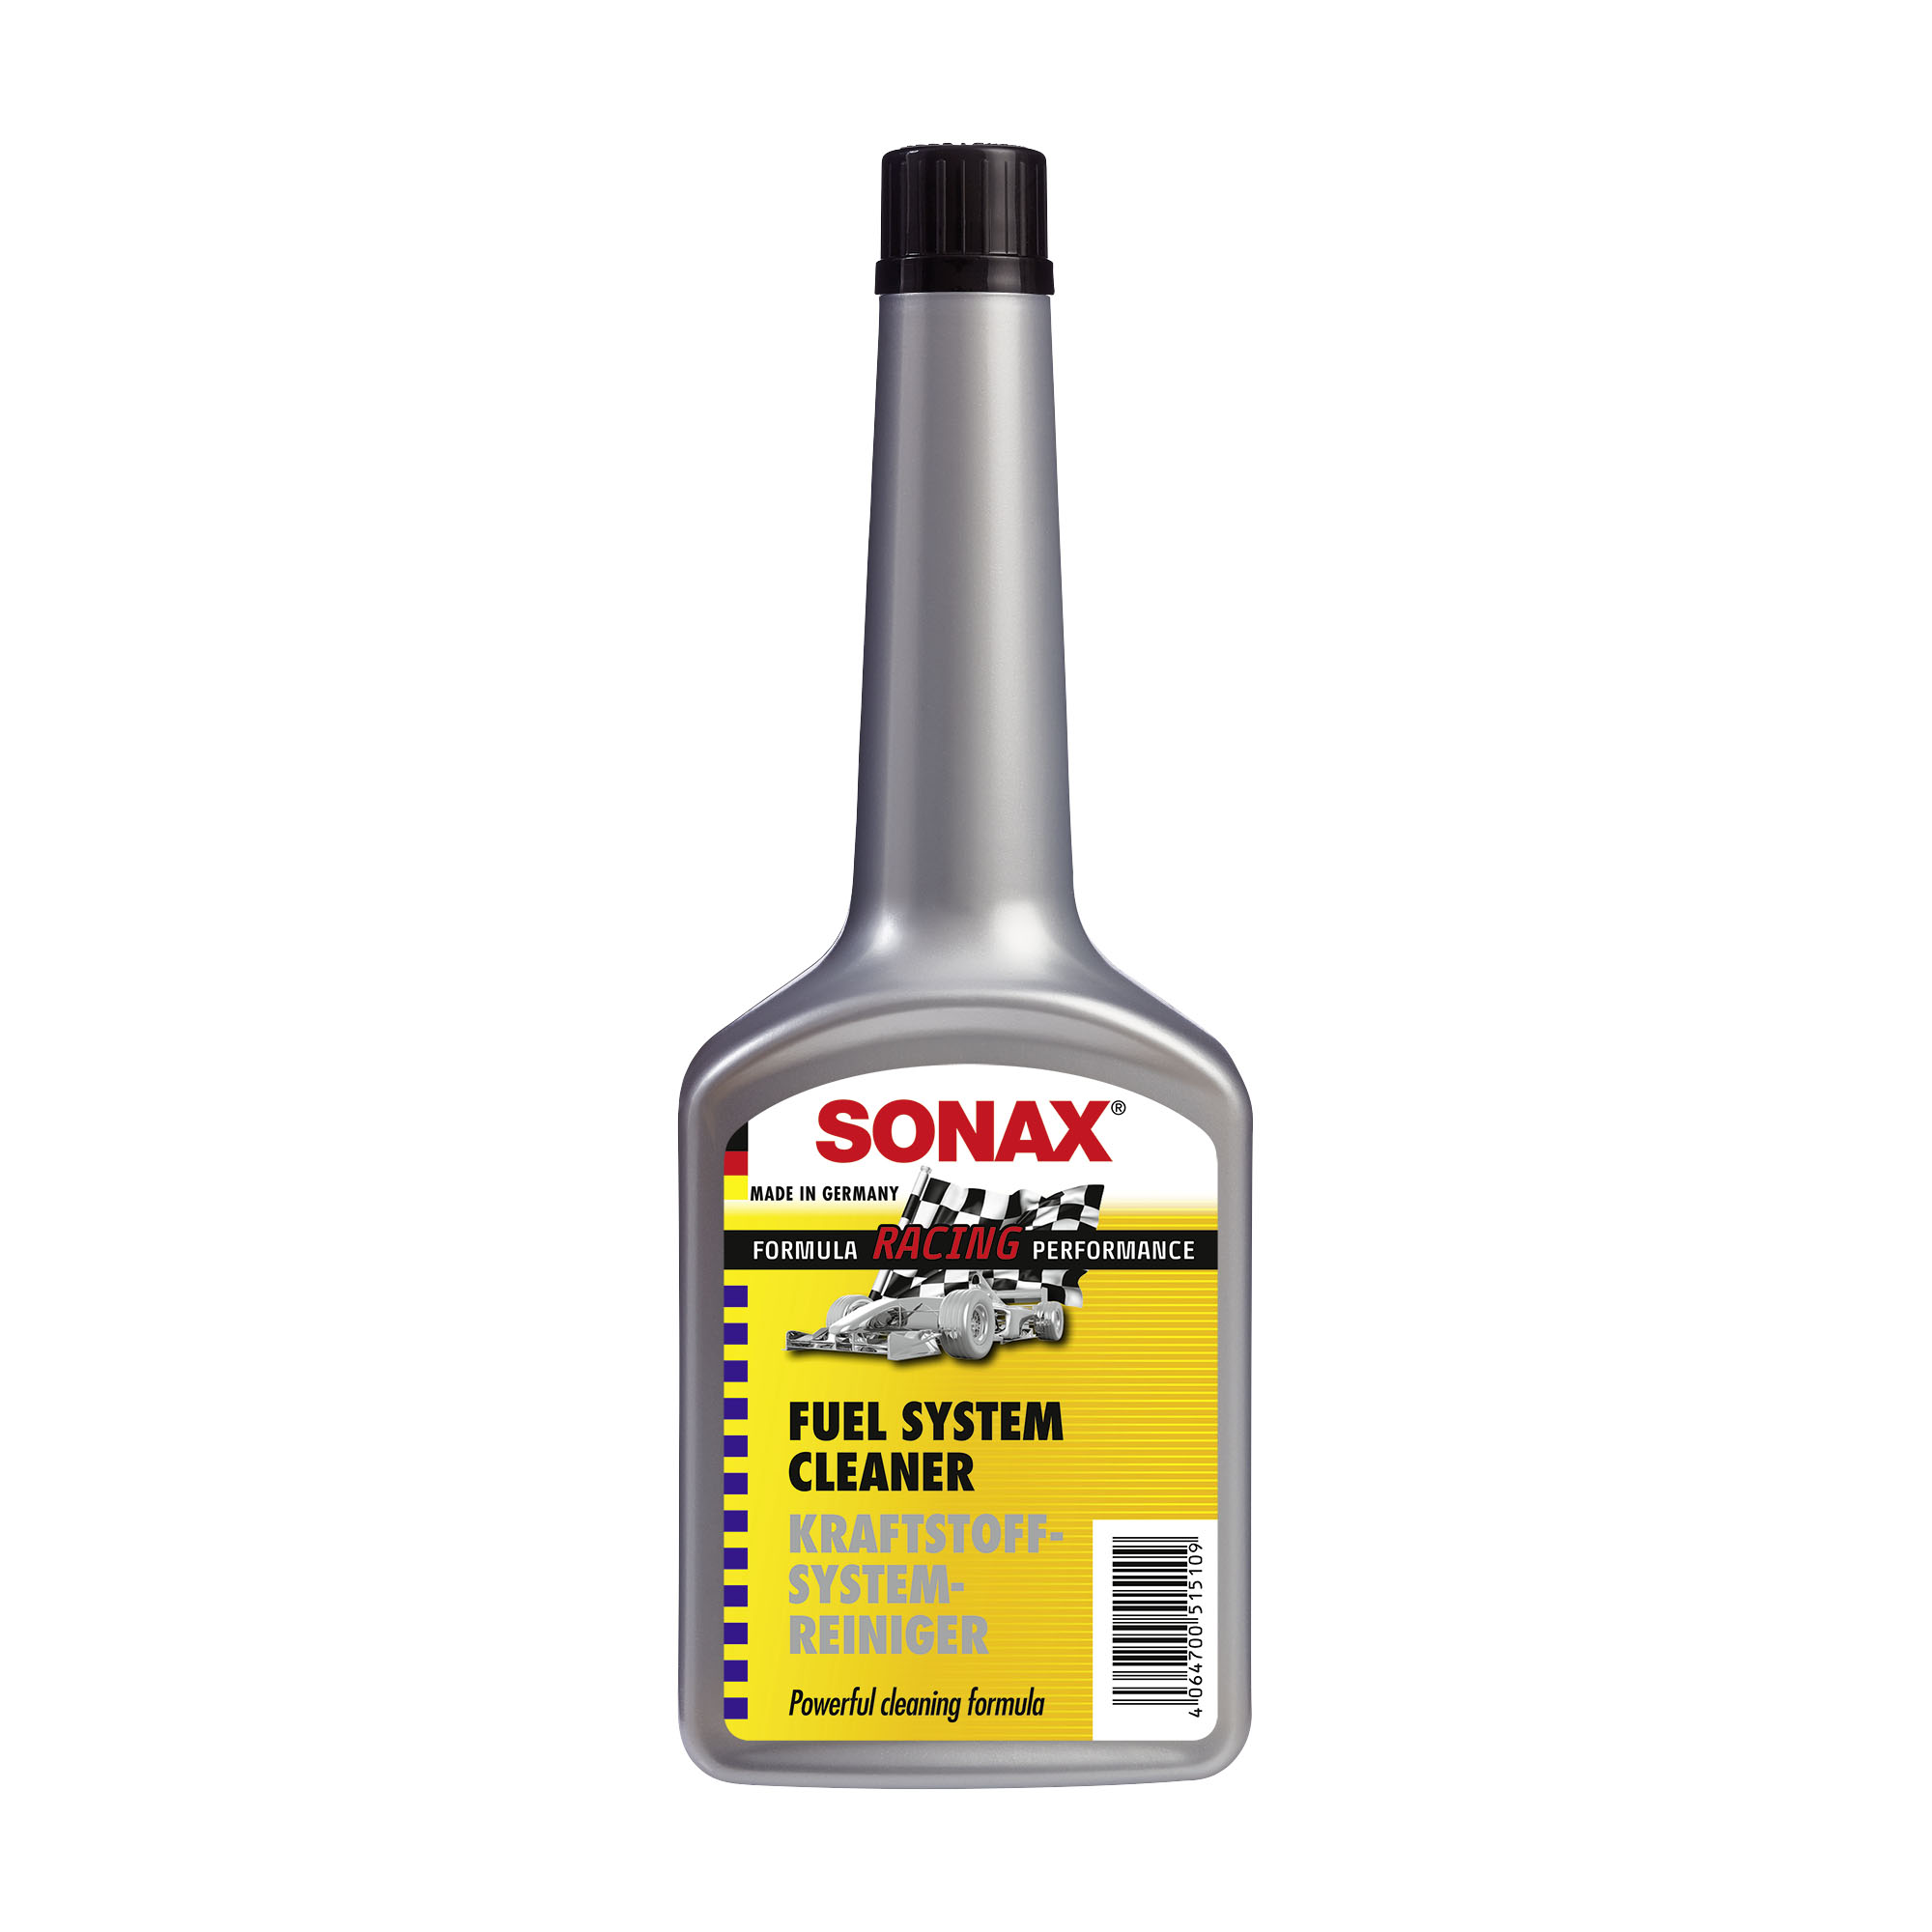 Sonax Fuel System Cleaner